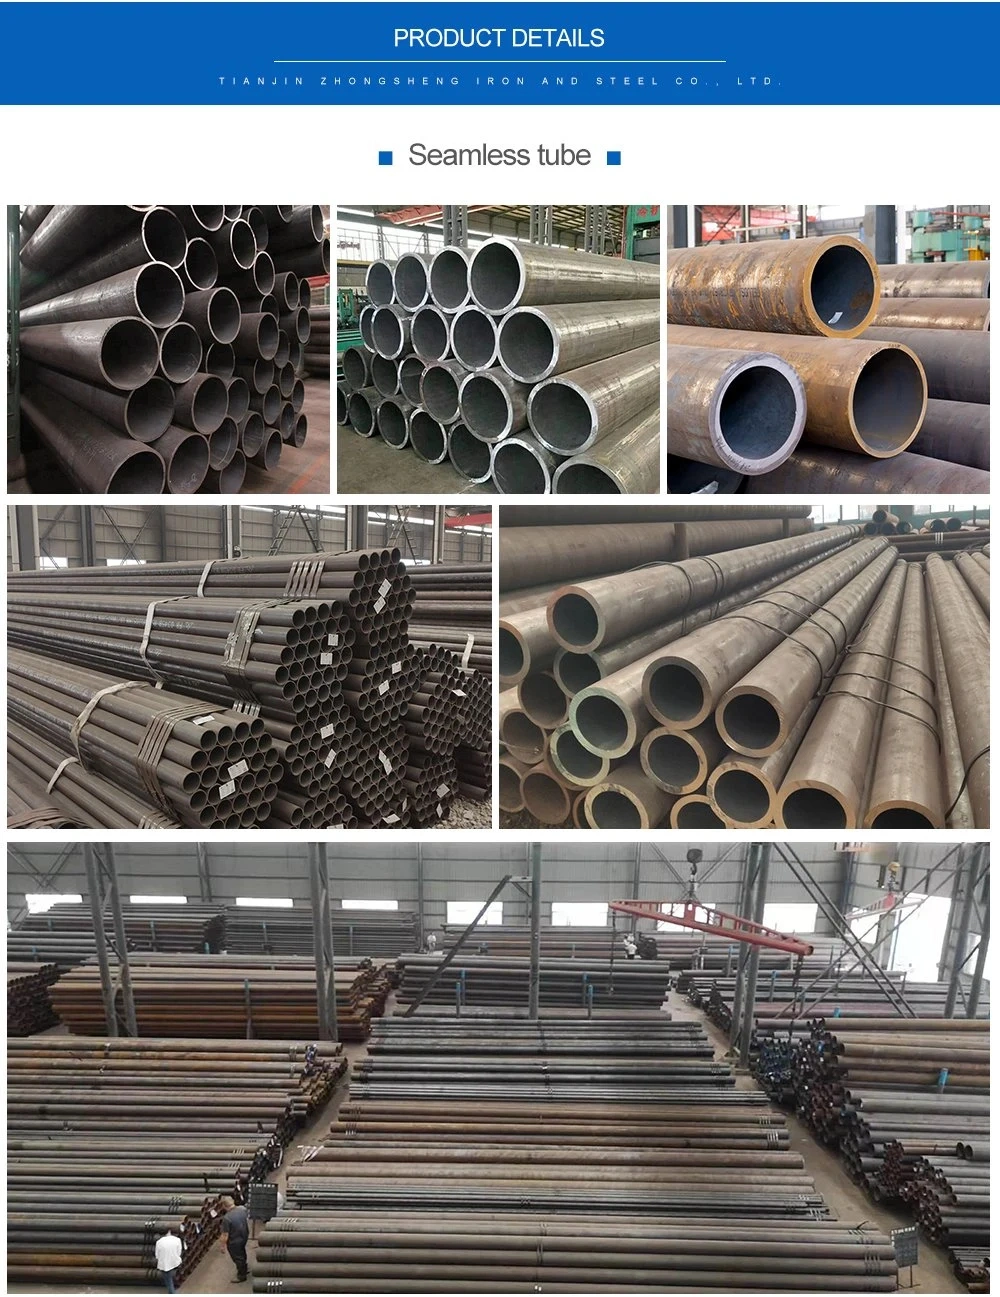 Small Caliber CS Seamless Carbon Steel Pipe with A106/T91/J55